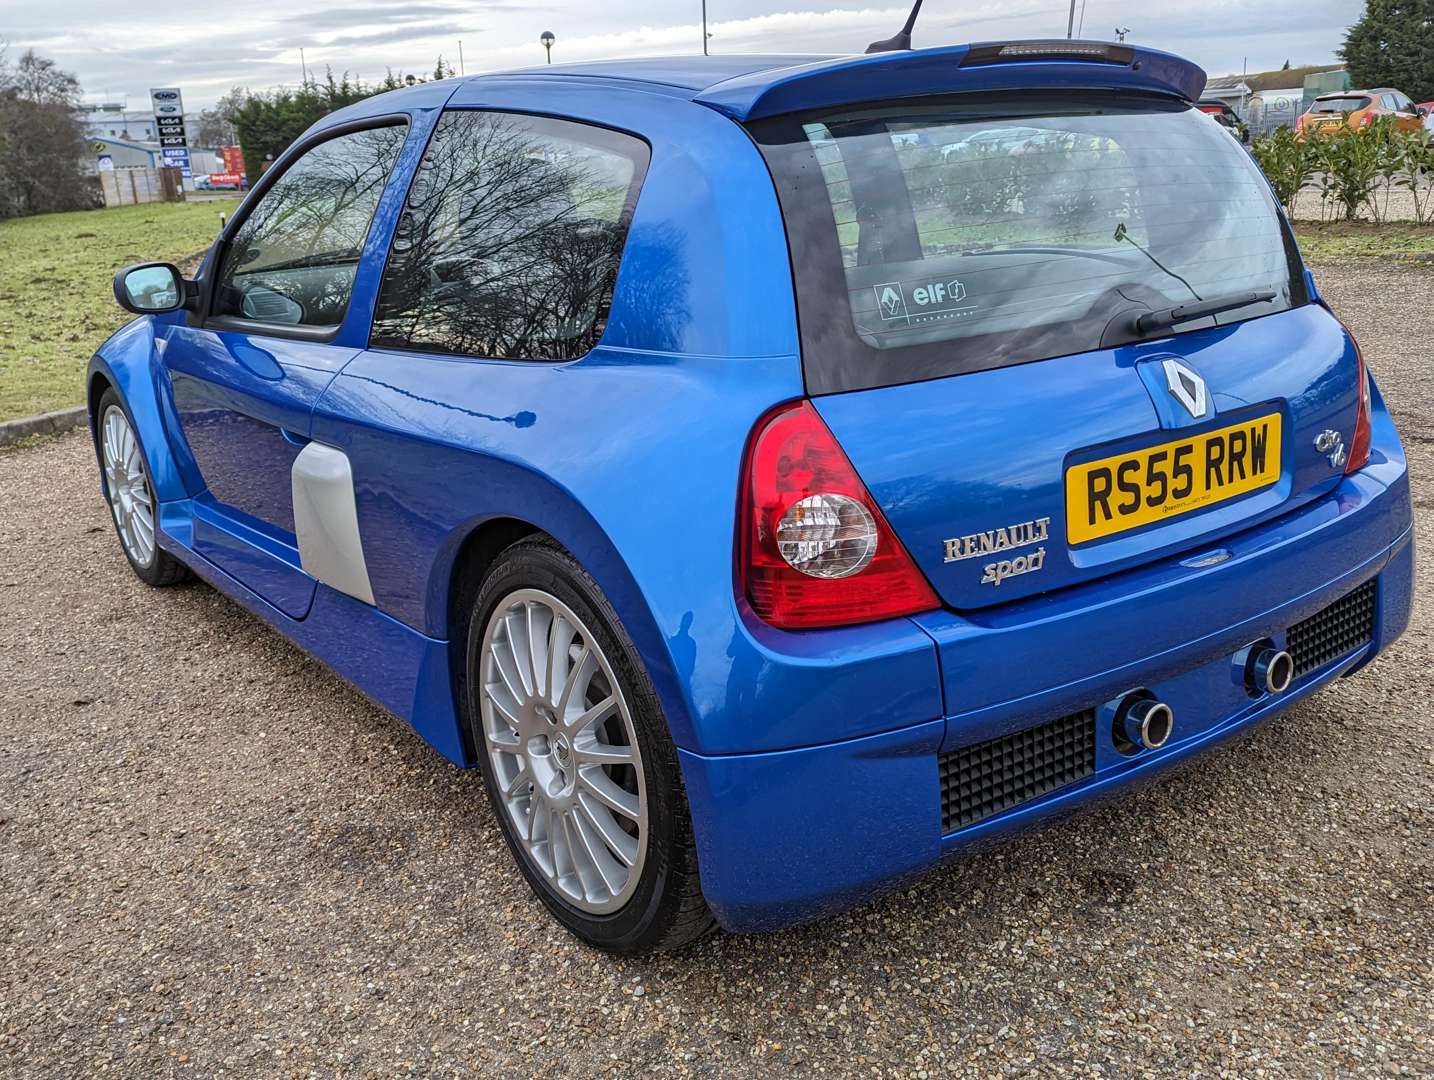 2003 RENAULT CLIO V6 PHASE 2 for sale by auction in Belfast, Northern  Ireland, United Kingdom